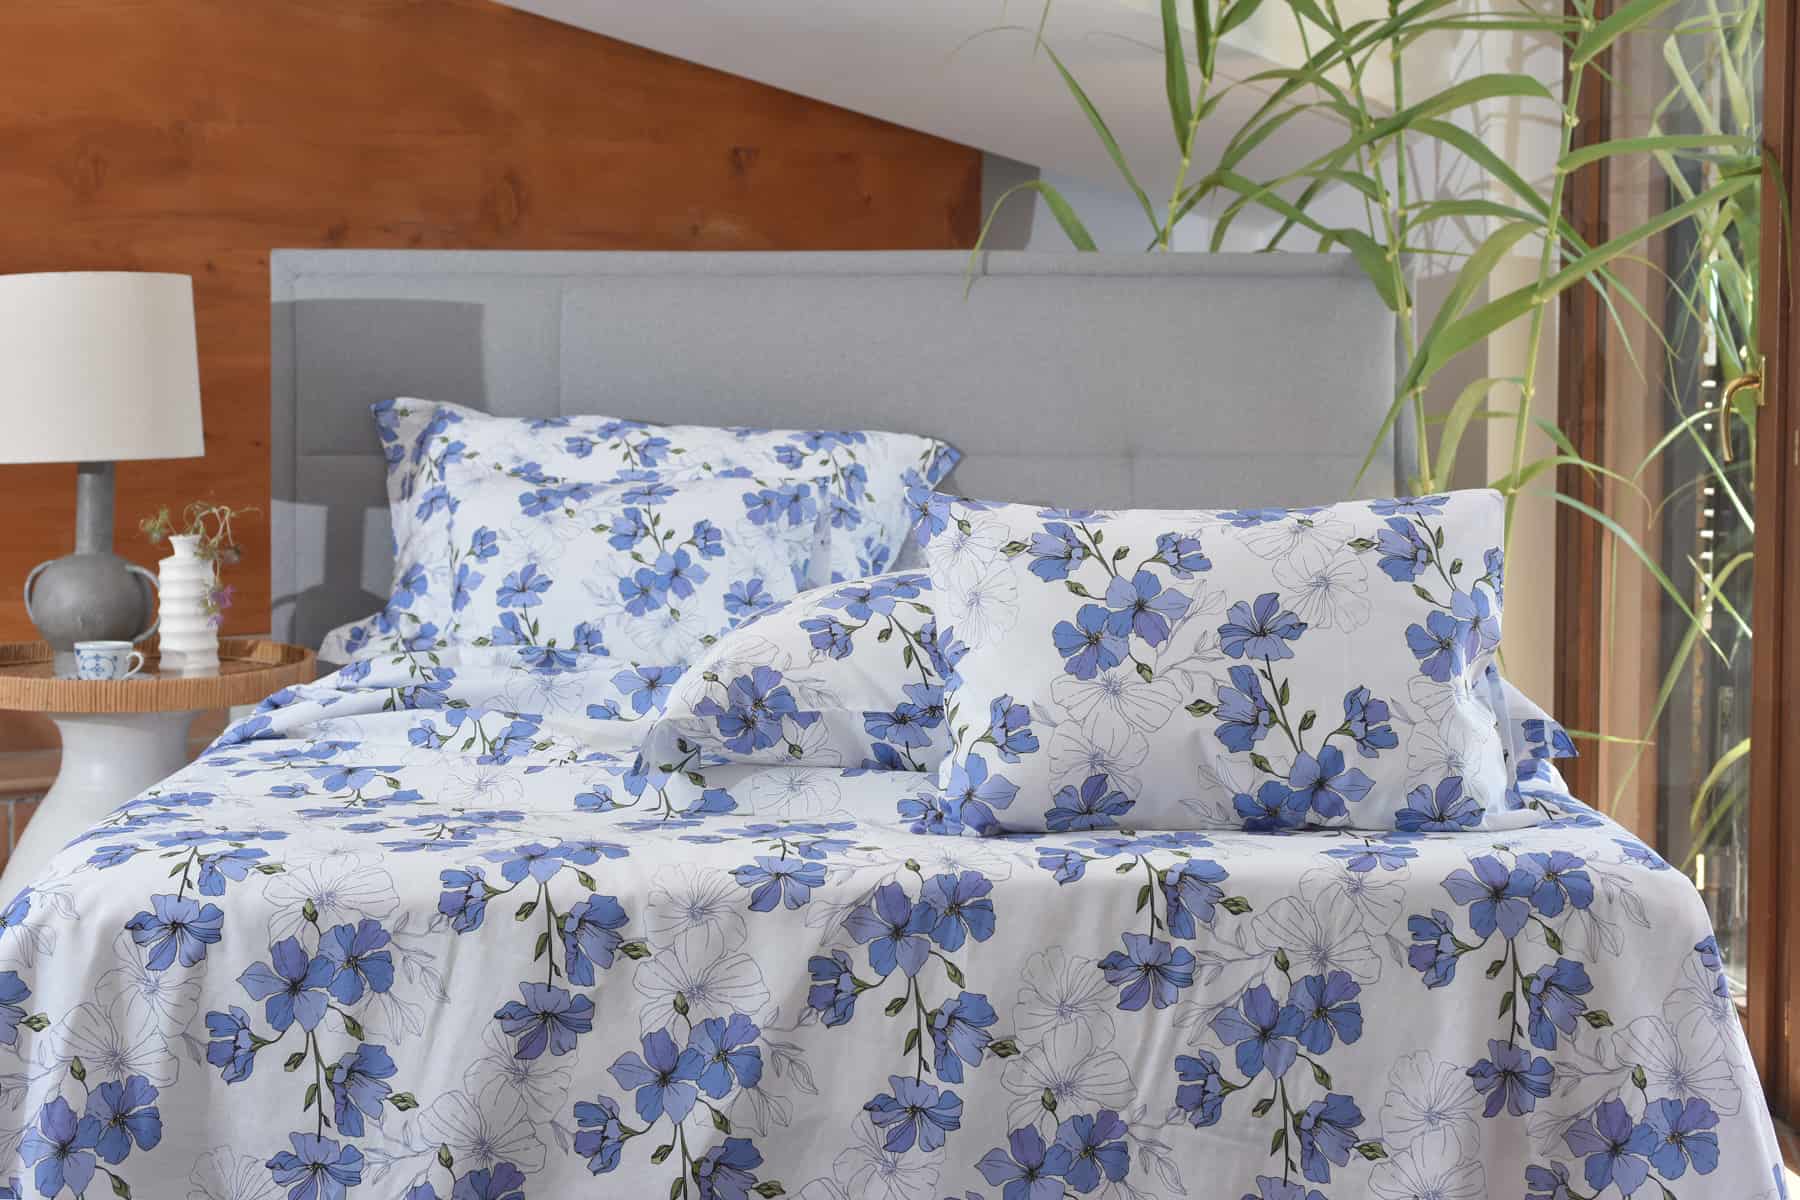 Handcrafted bedding